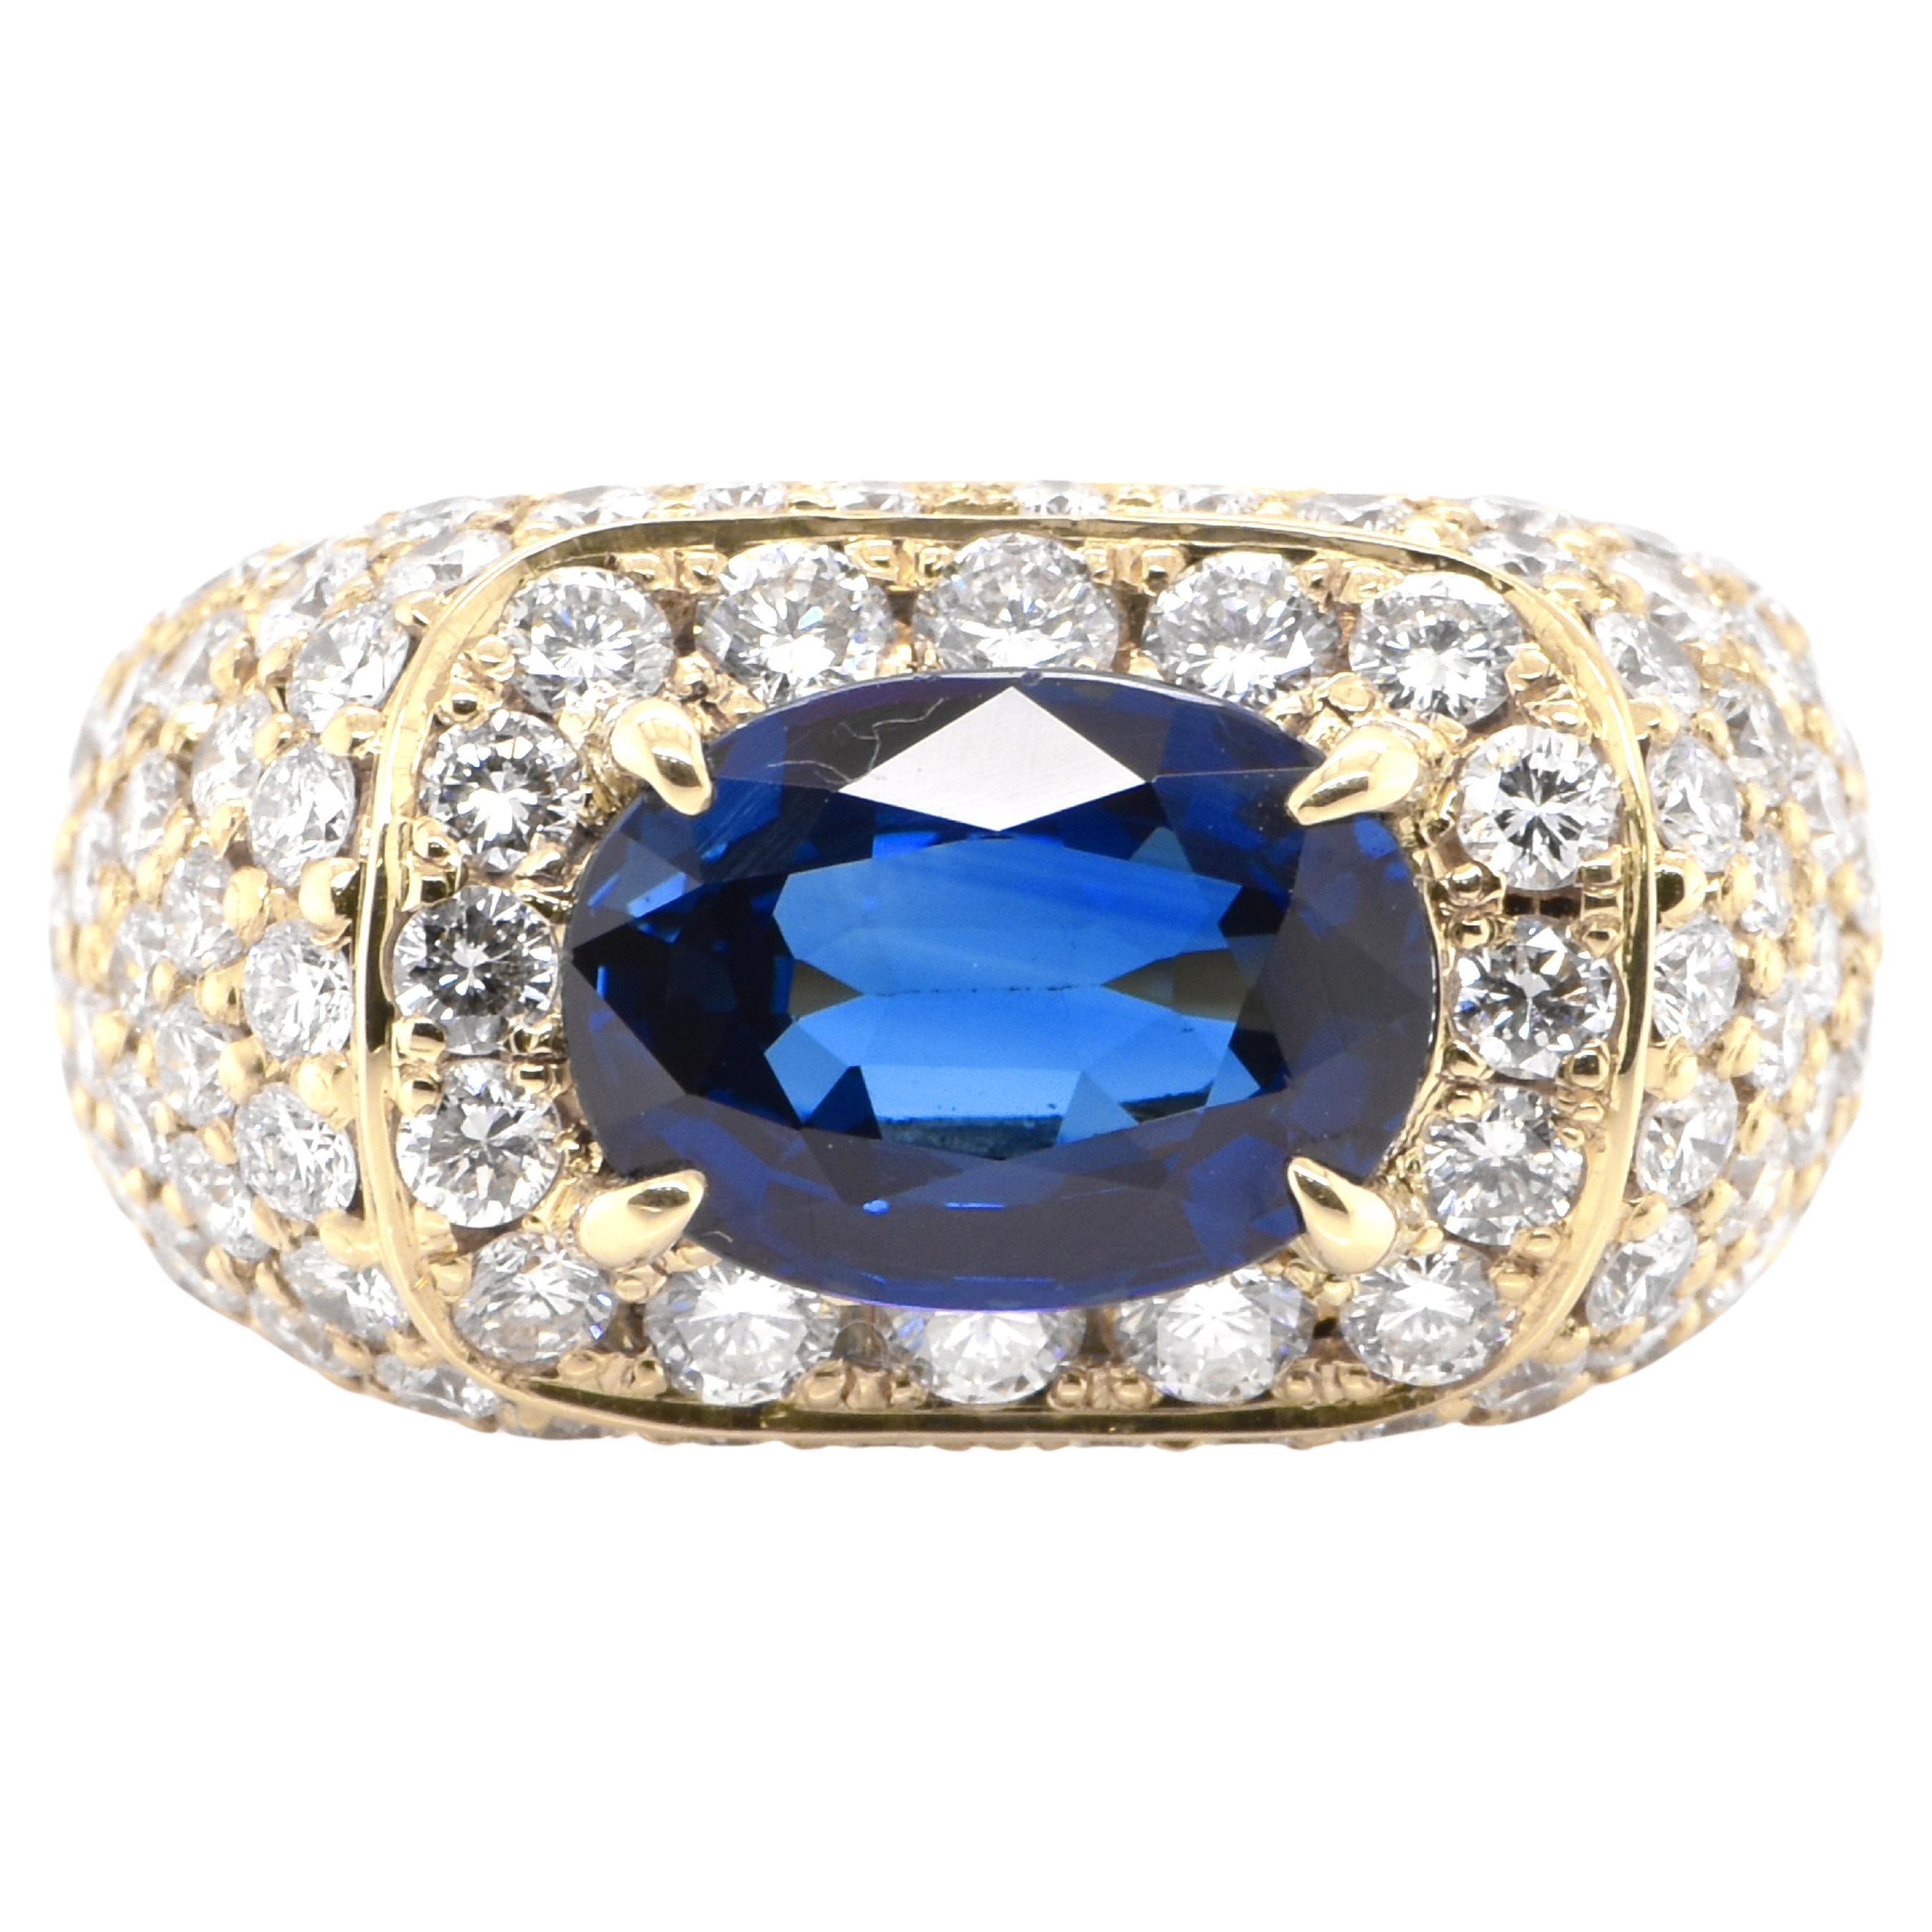 3.47 Carat Natural Sapphire and Diamond Cocktail Ring Set in 18K Yellow Gold For Sale